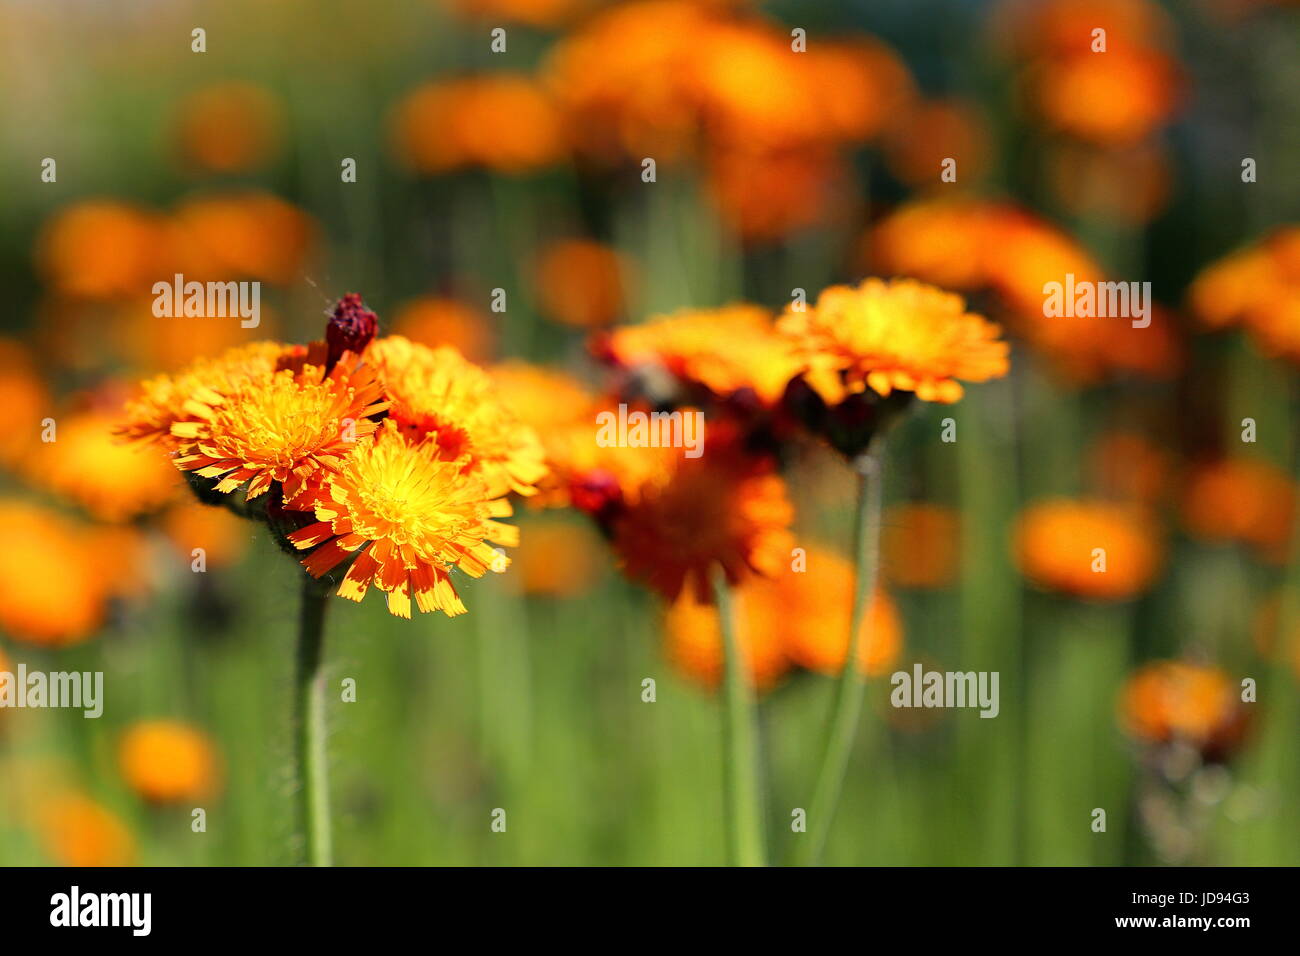 Orange blooming flower surrounded by nature Stock Photo